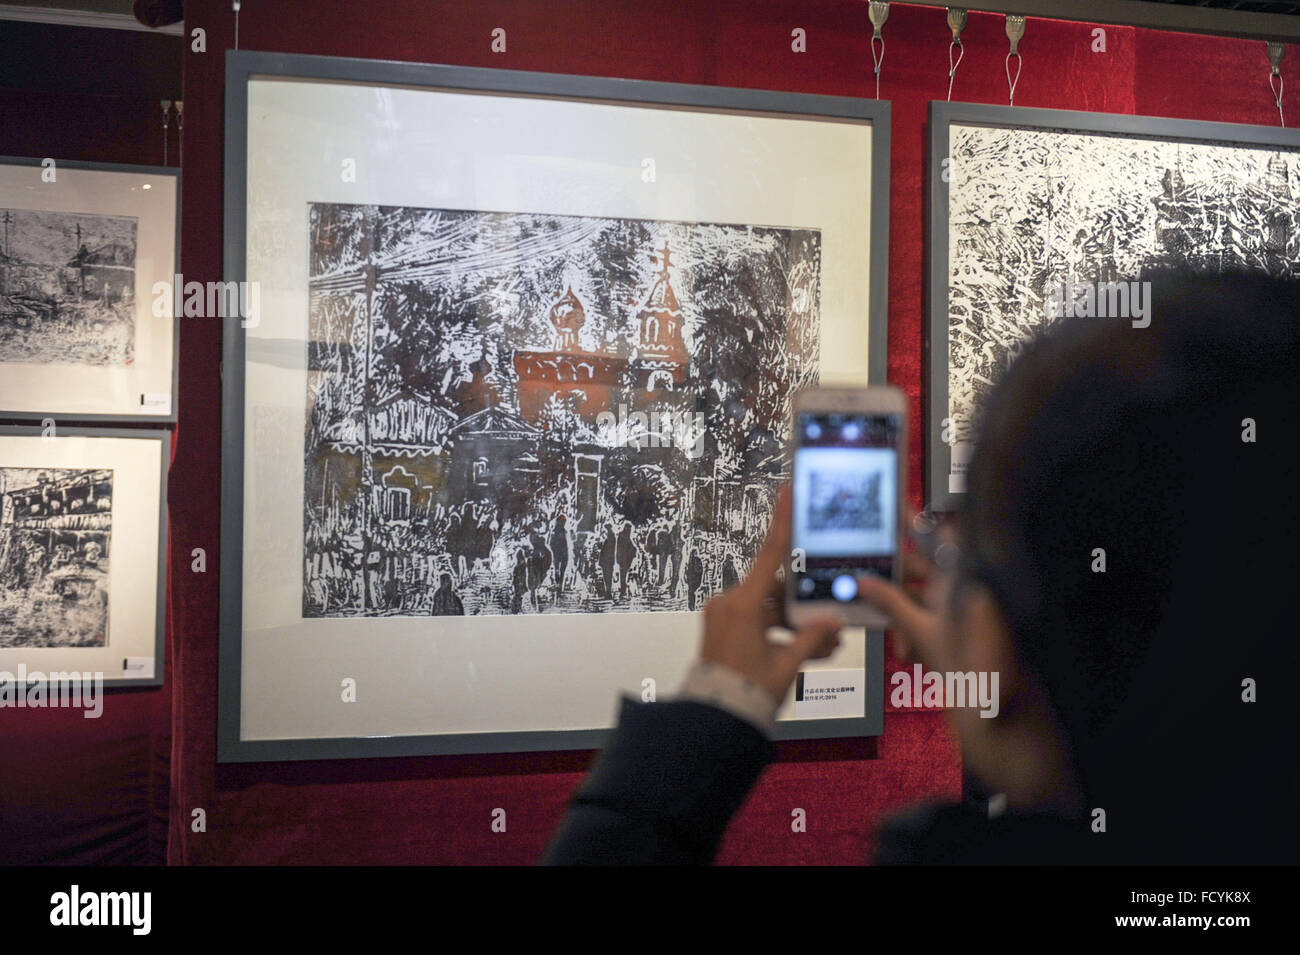 Harbin, China's Heilongjiang Province. 26th Jan, 2016. A visitor takes photos at an exhibition of ice engraving painting in Harbin, capital of northeast China's Heilongjiang Province, Jan. 26, 2016. The pictures on display were printed from engraved ice slabs, according to artist Zhu Xiaodong. He said each ice slab was able to print out some 20 pages yielding variant results as the ice melted down. © Wang Song/Xinhua/Alamy Live News Stock Photo